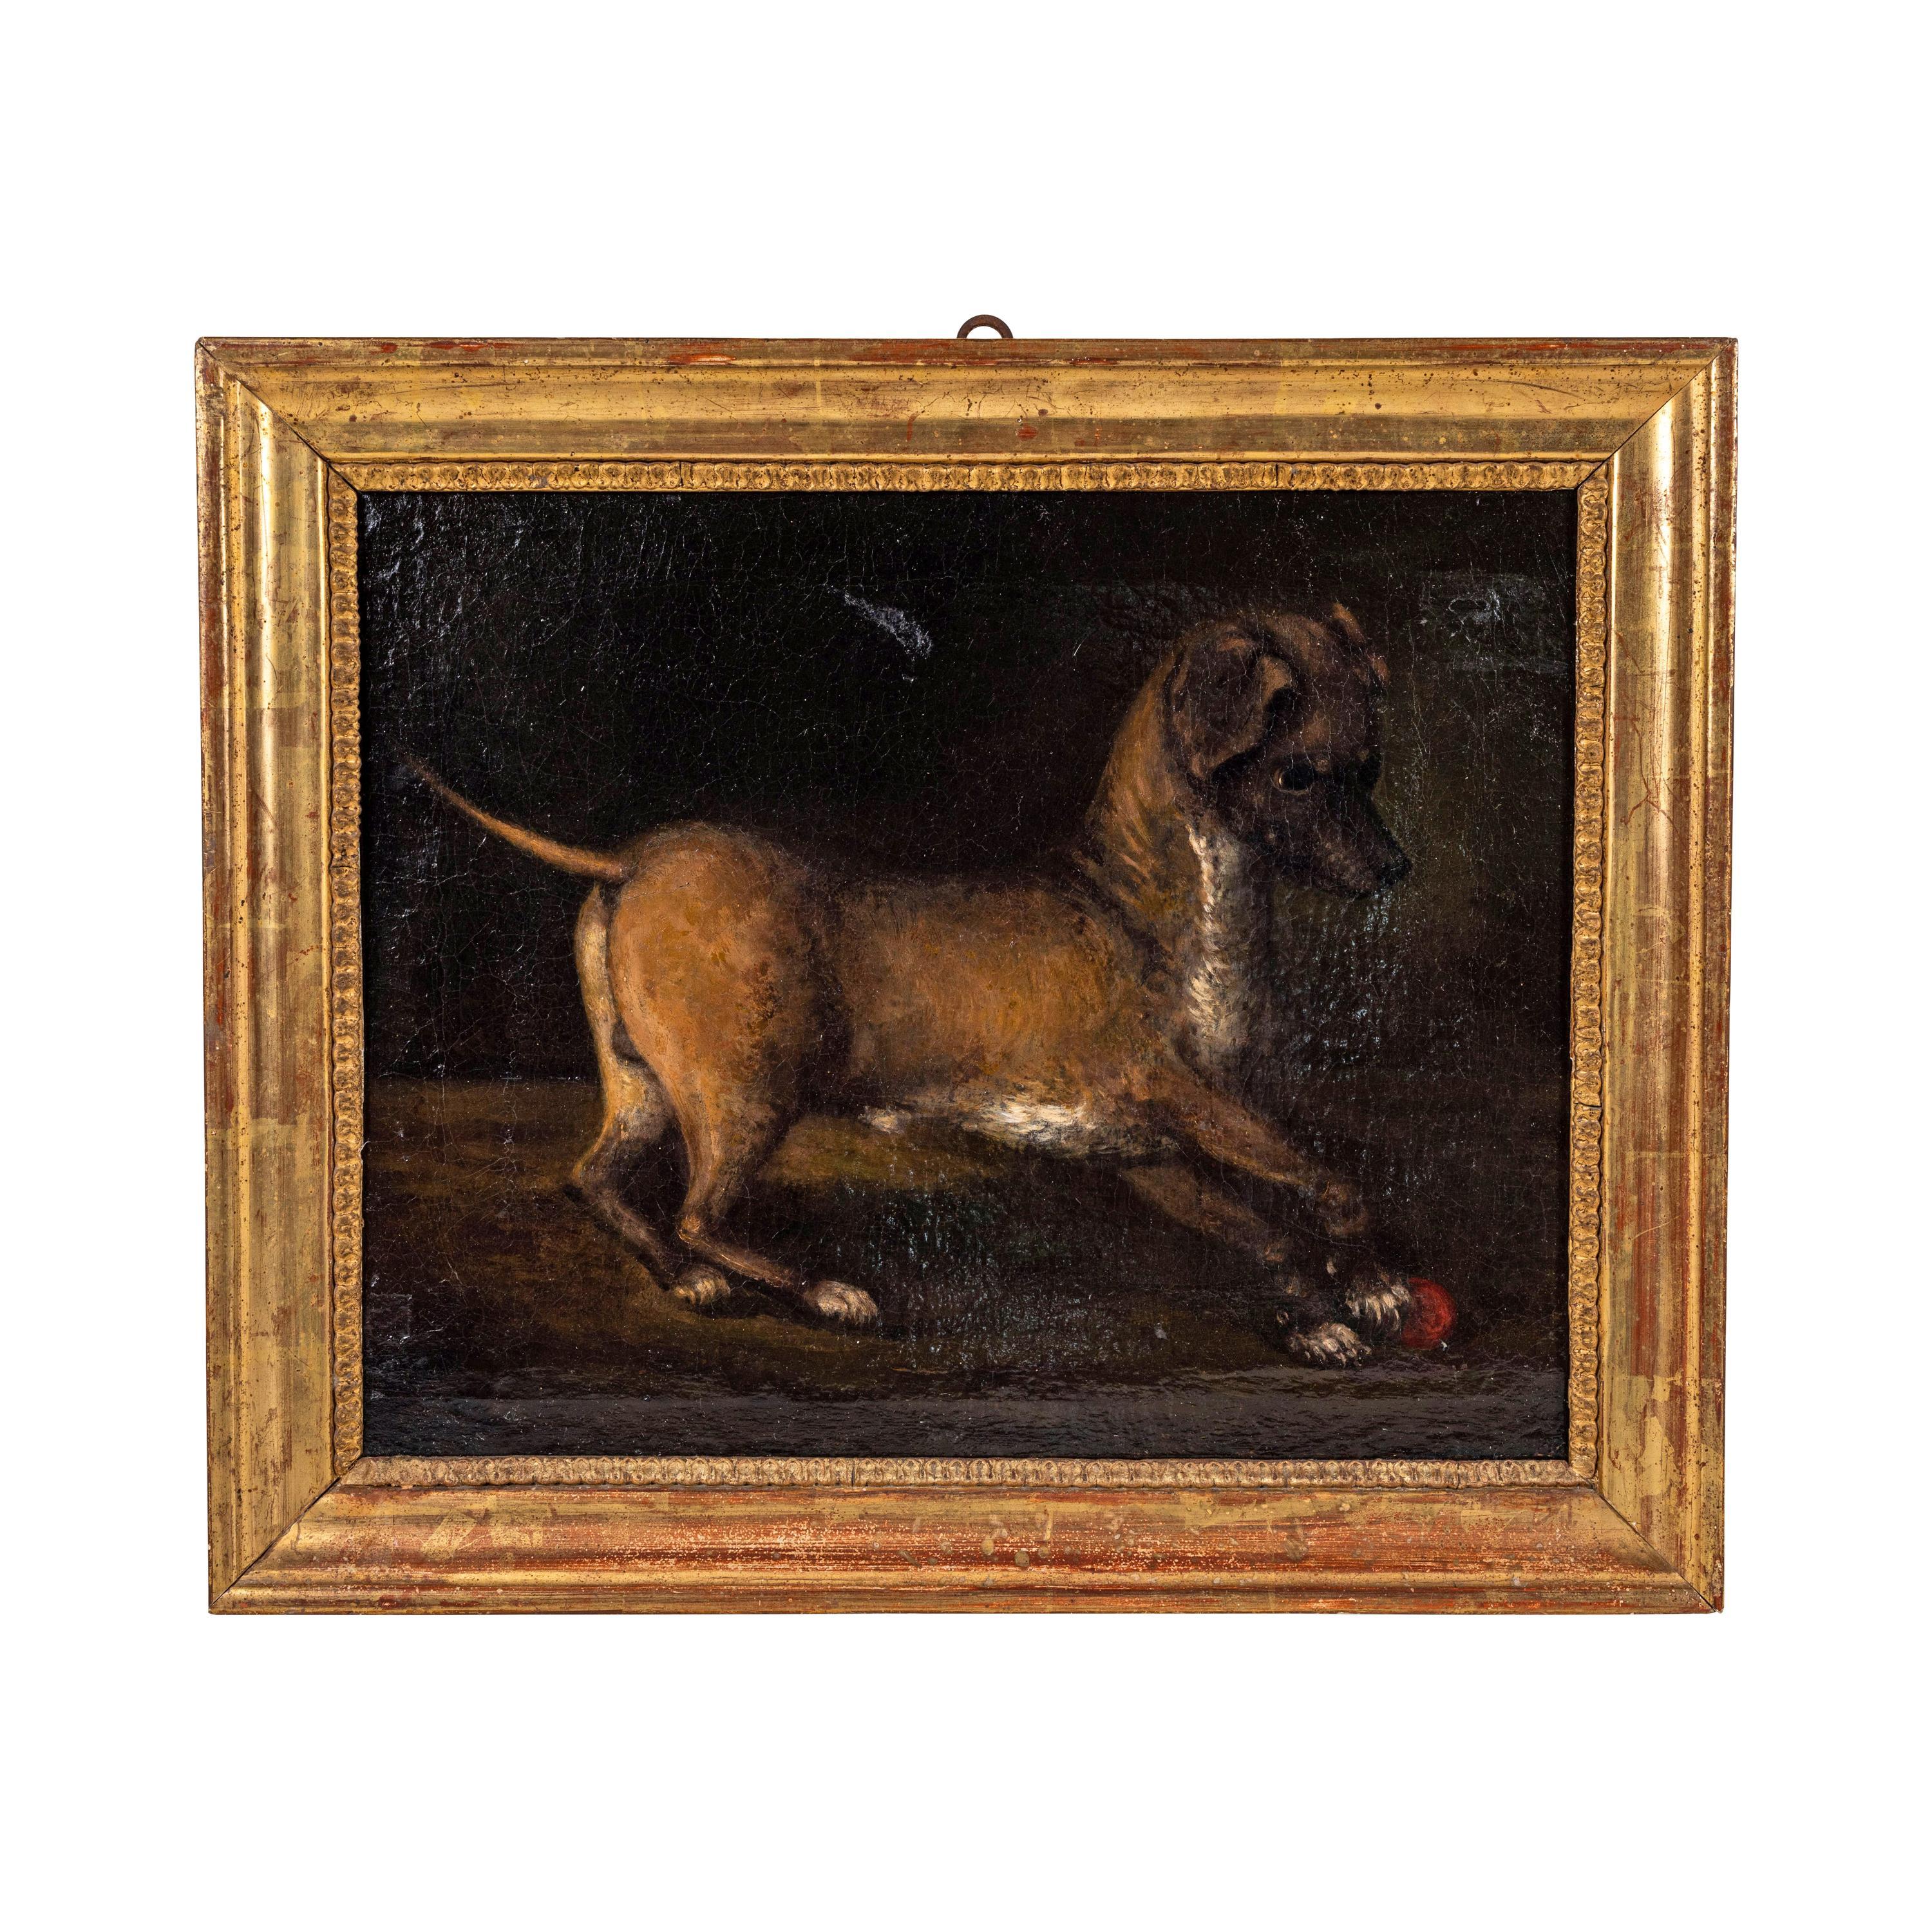 Absolutely charming, original, circa 1650, Italian, oil on canvas painting of a puppy at play with a crimson ball. 

Canvas size: 14.75 in. high x 18.25 in. wide.